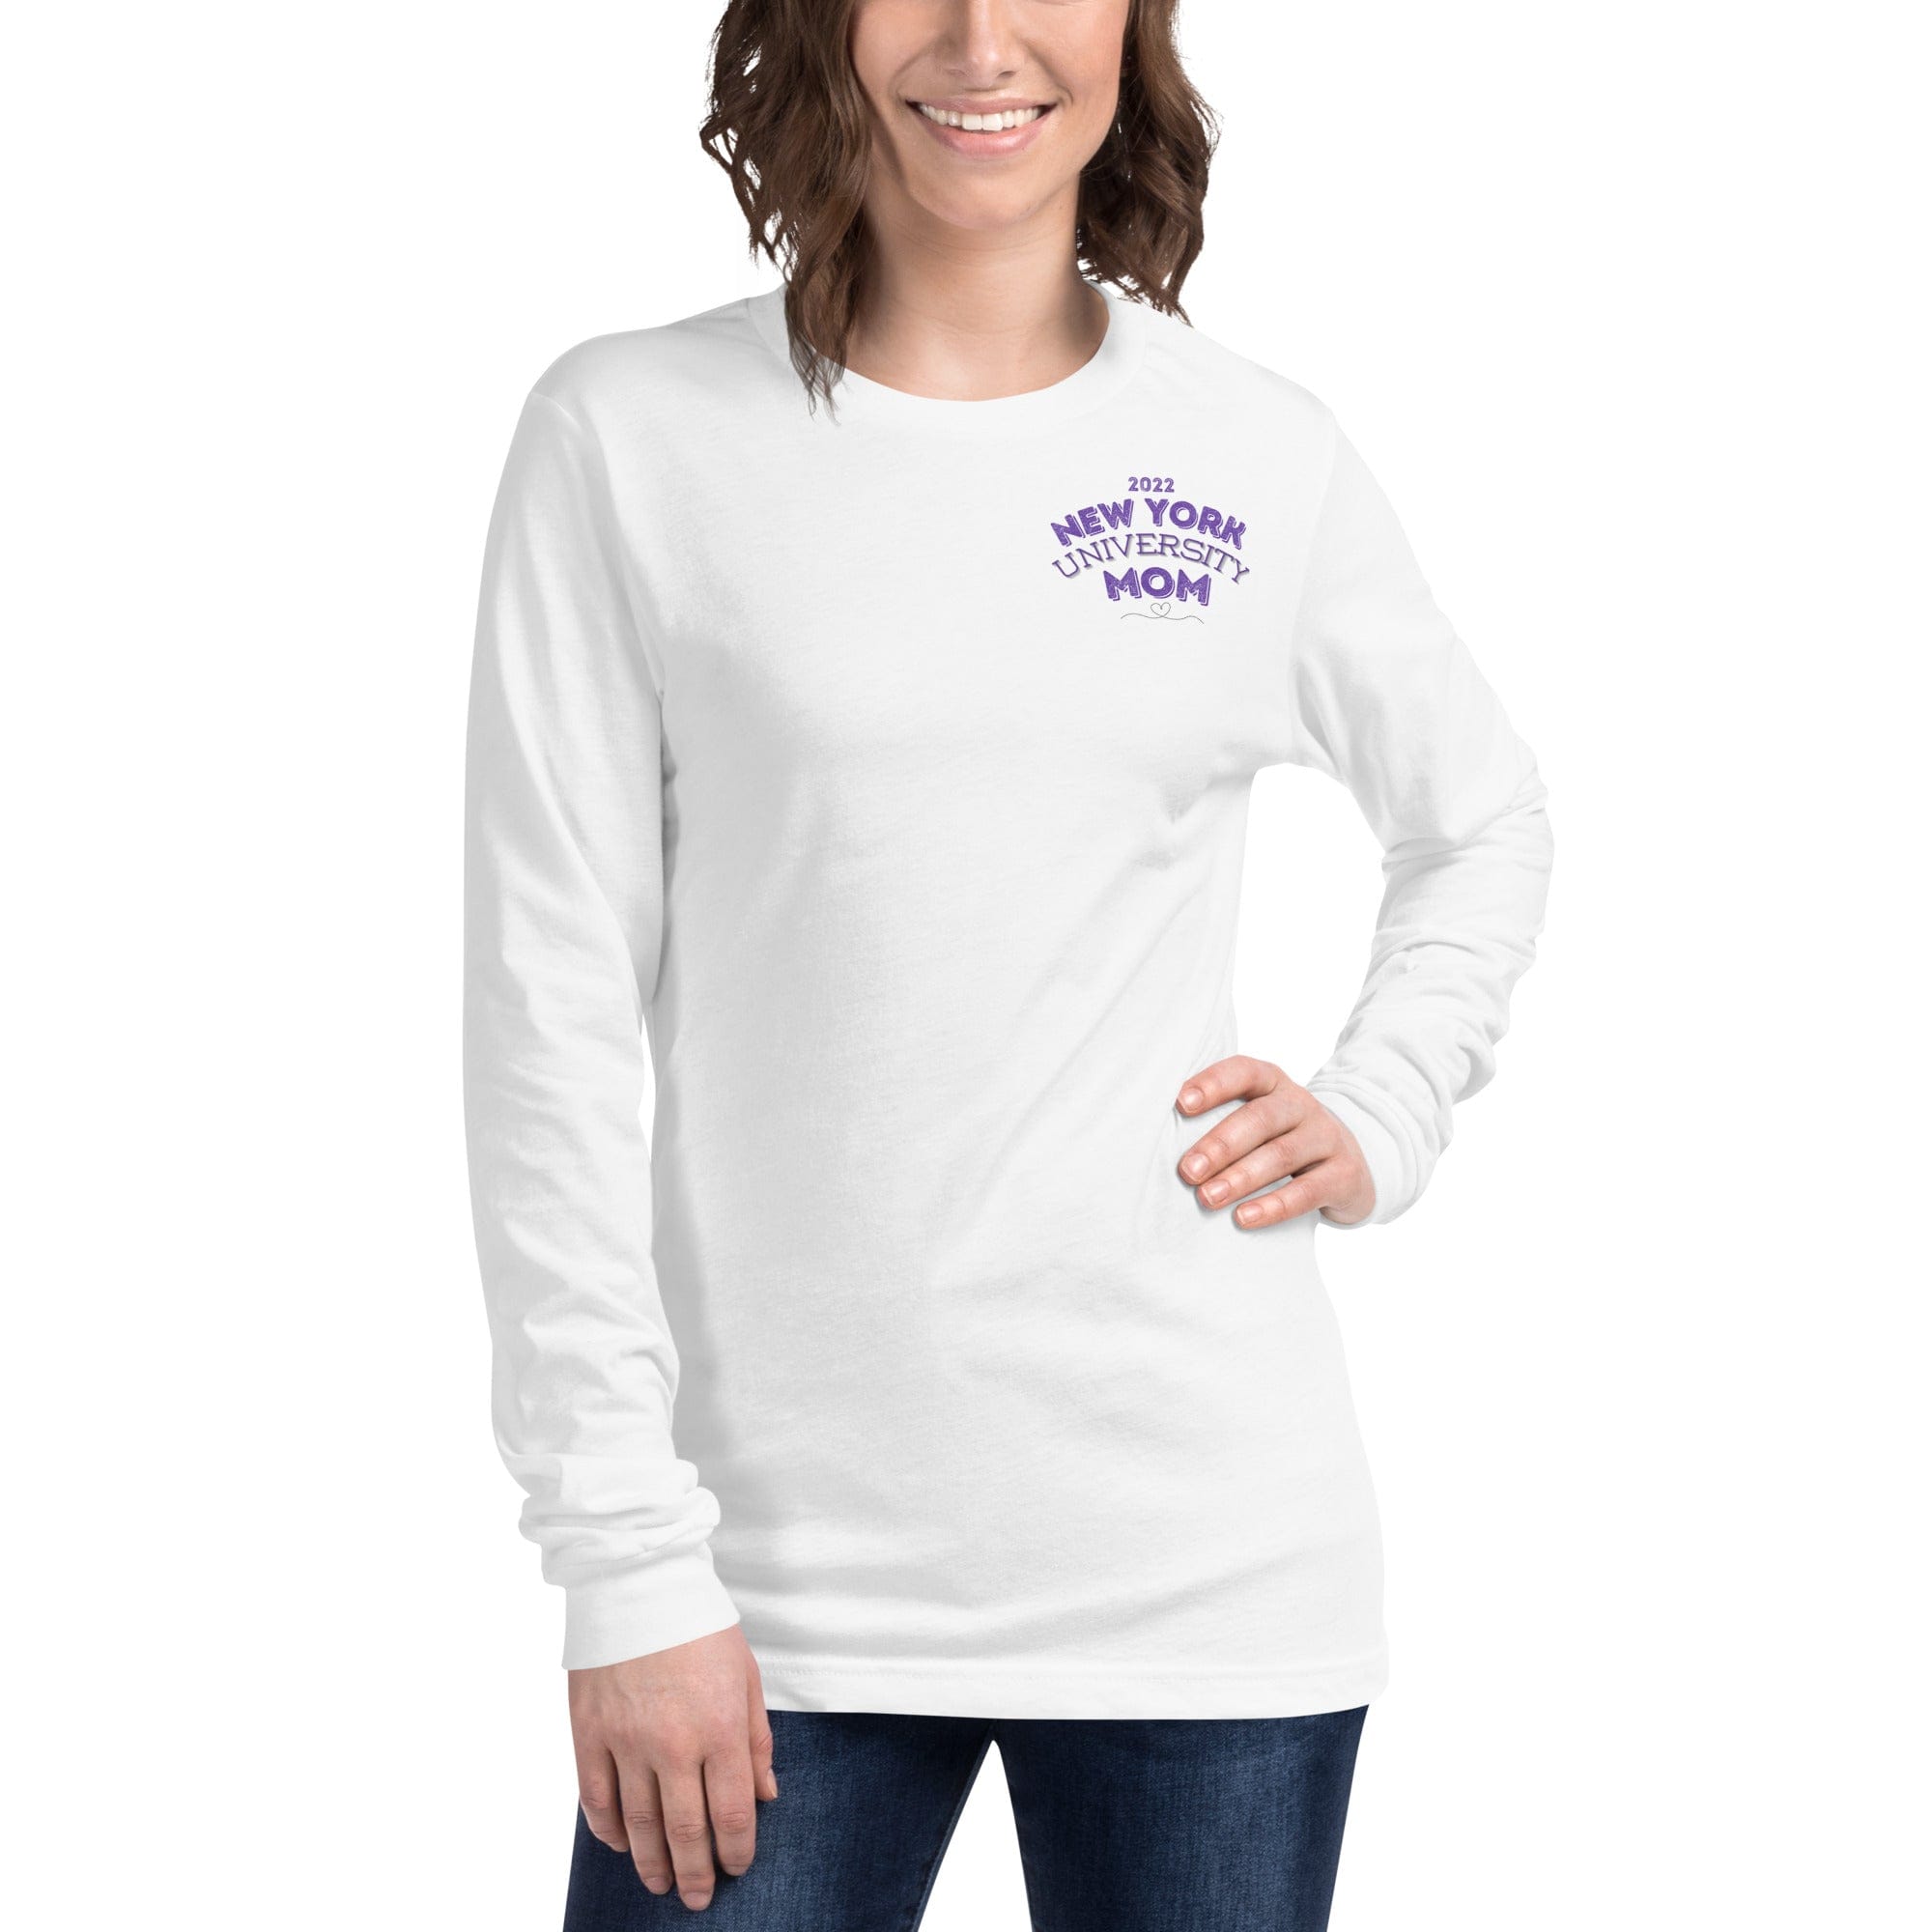 Spruced Roost White / XS New York University Mom Long Sleeve Tee